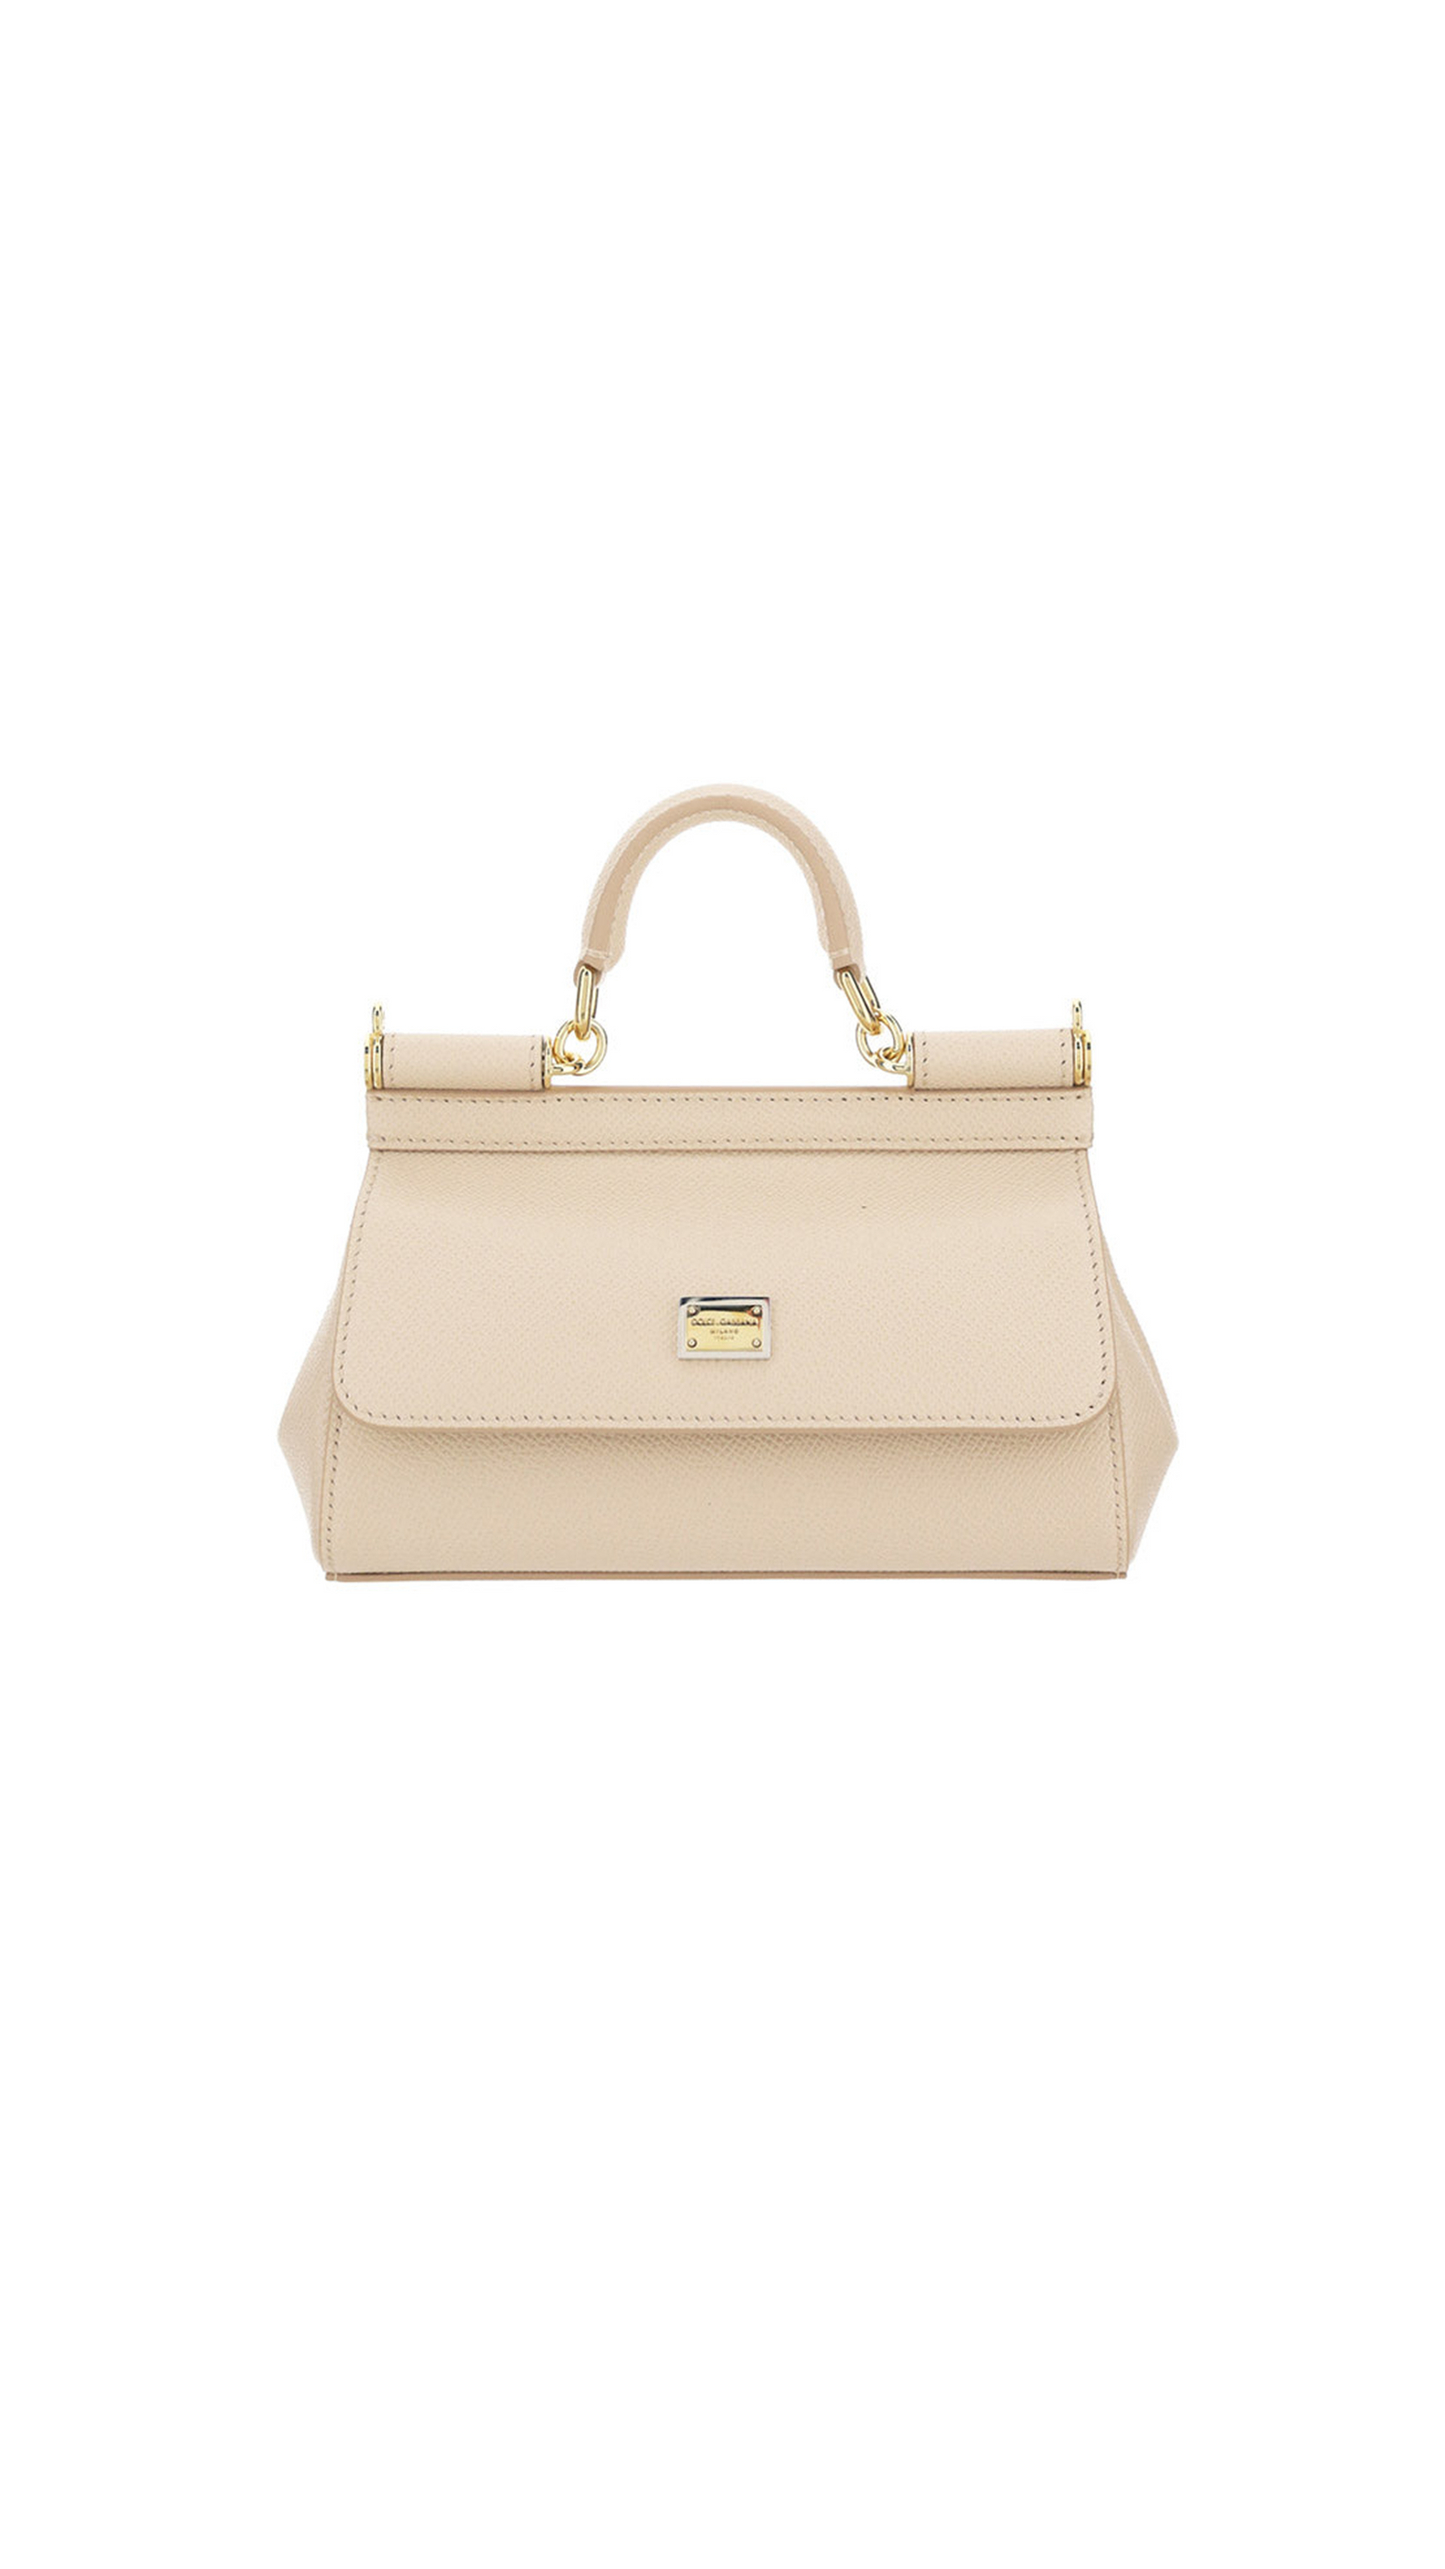 Small Sicily Bag in Dauphine Calfskin - Nude